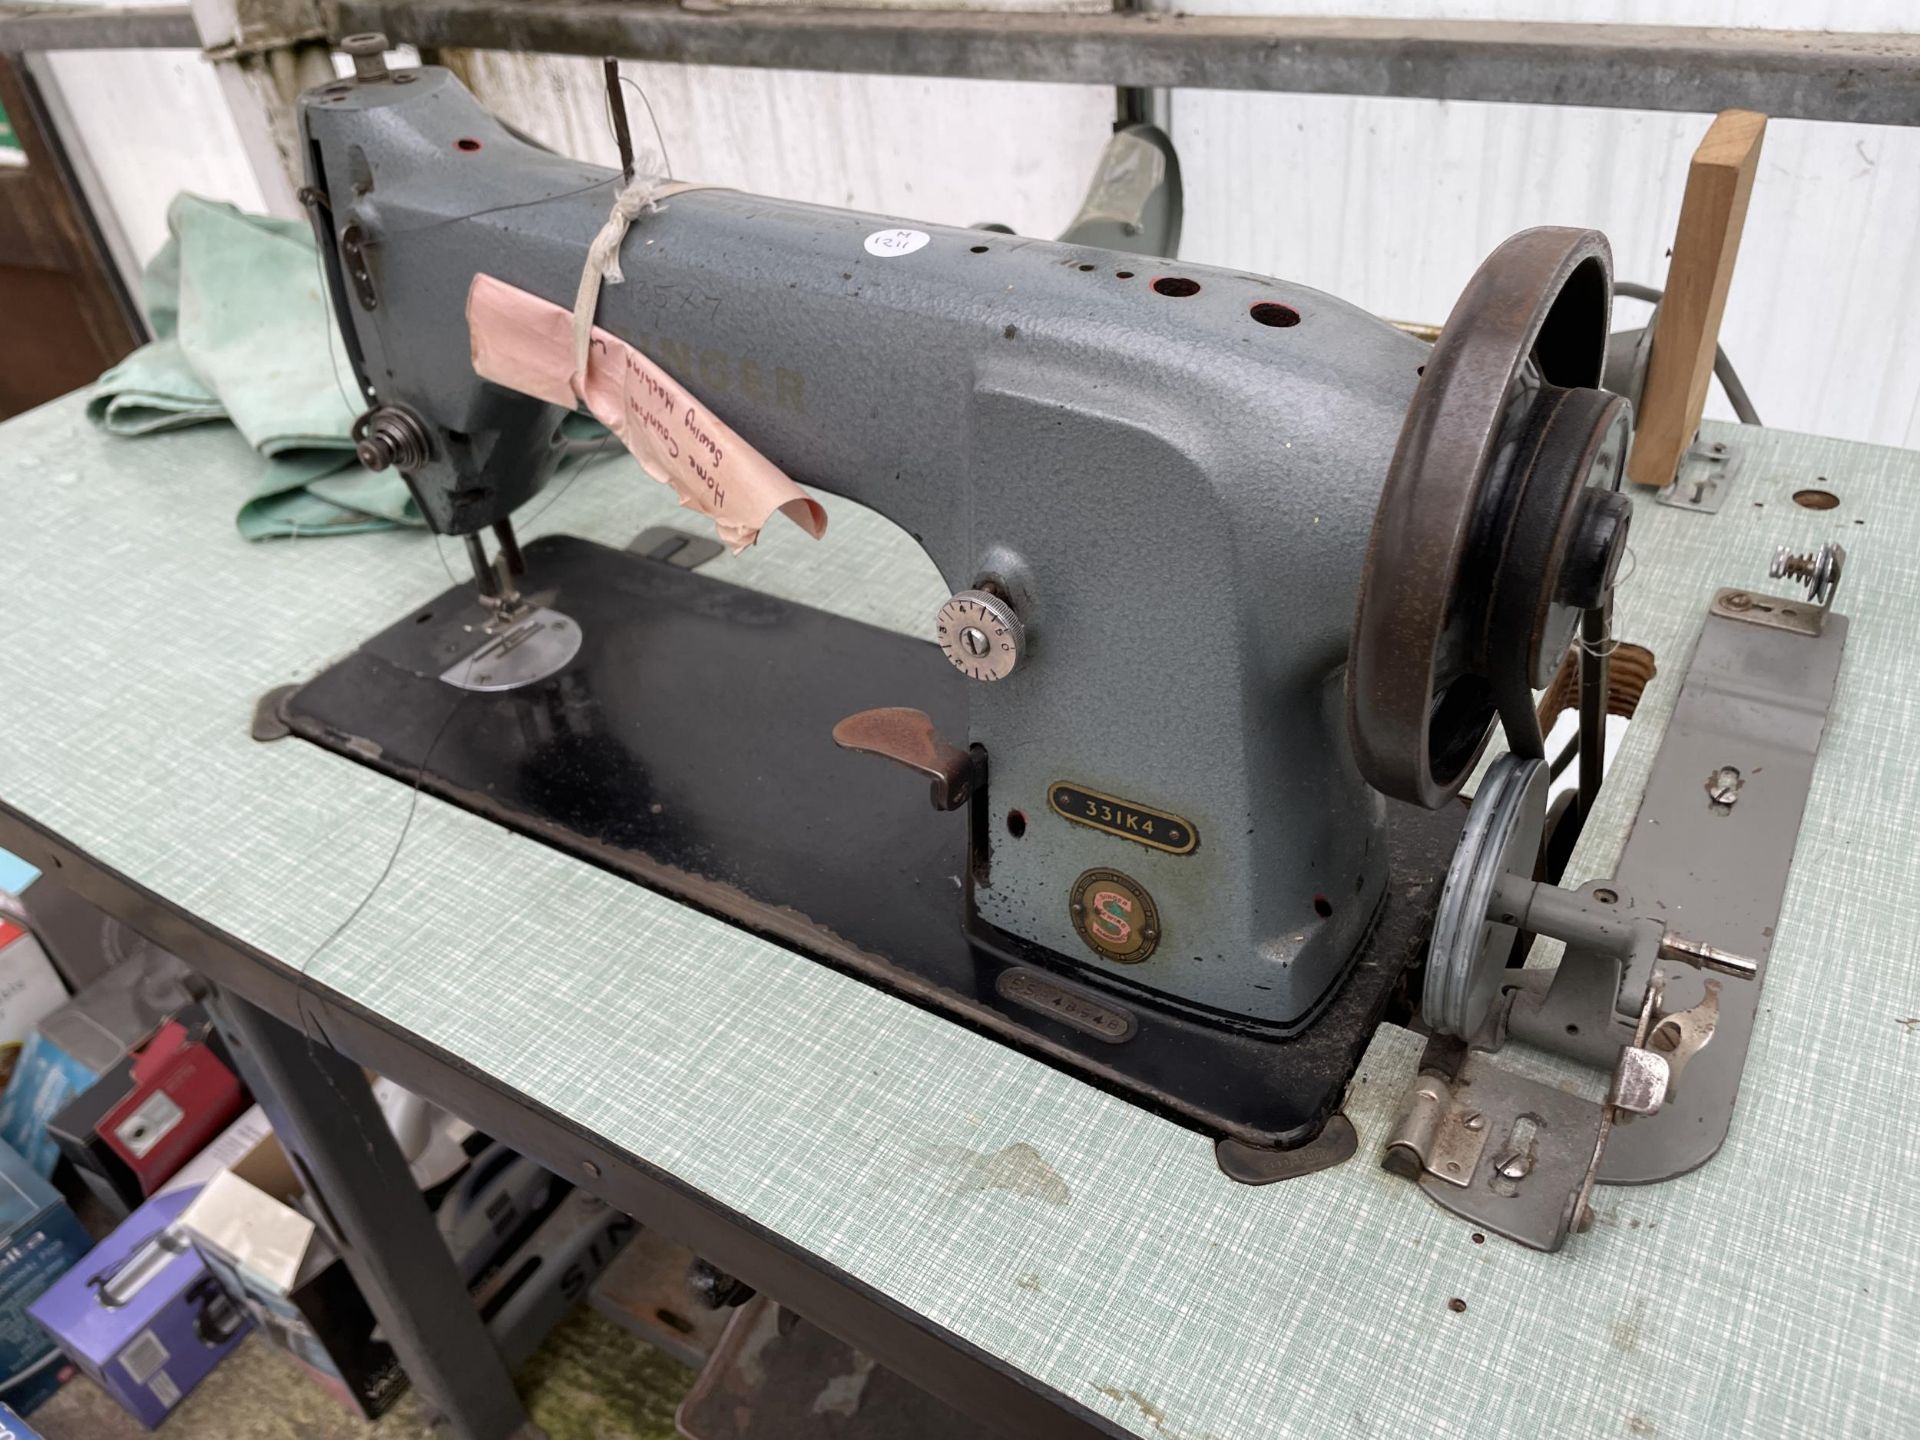 A VINTAGE SINGER INDUSTRIAL SEWING MACHINE WITH TREADLE BASE - Image 2 of 4